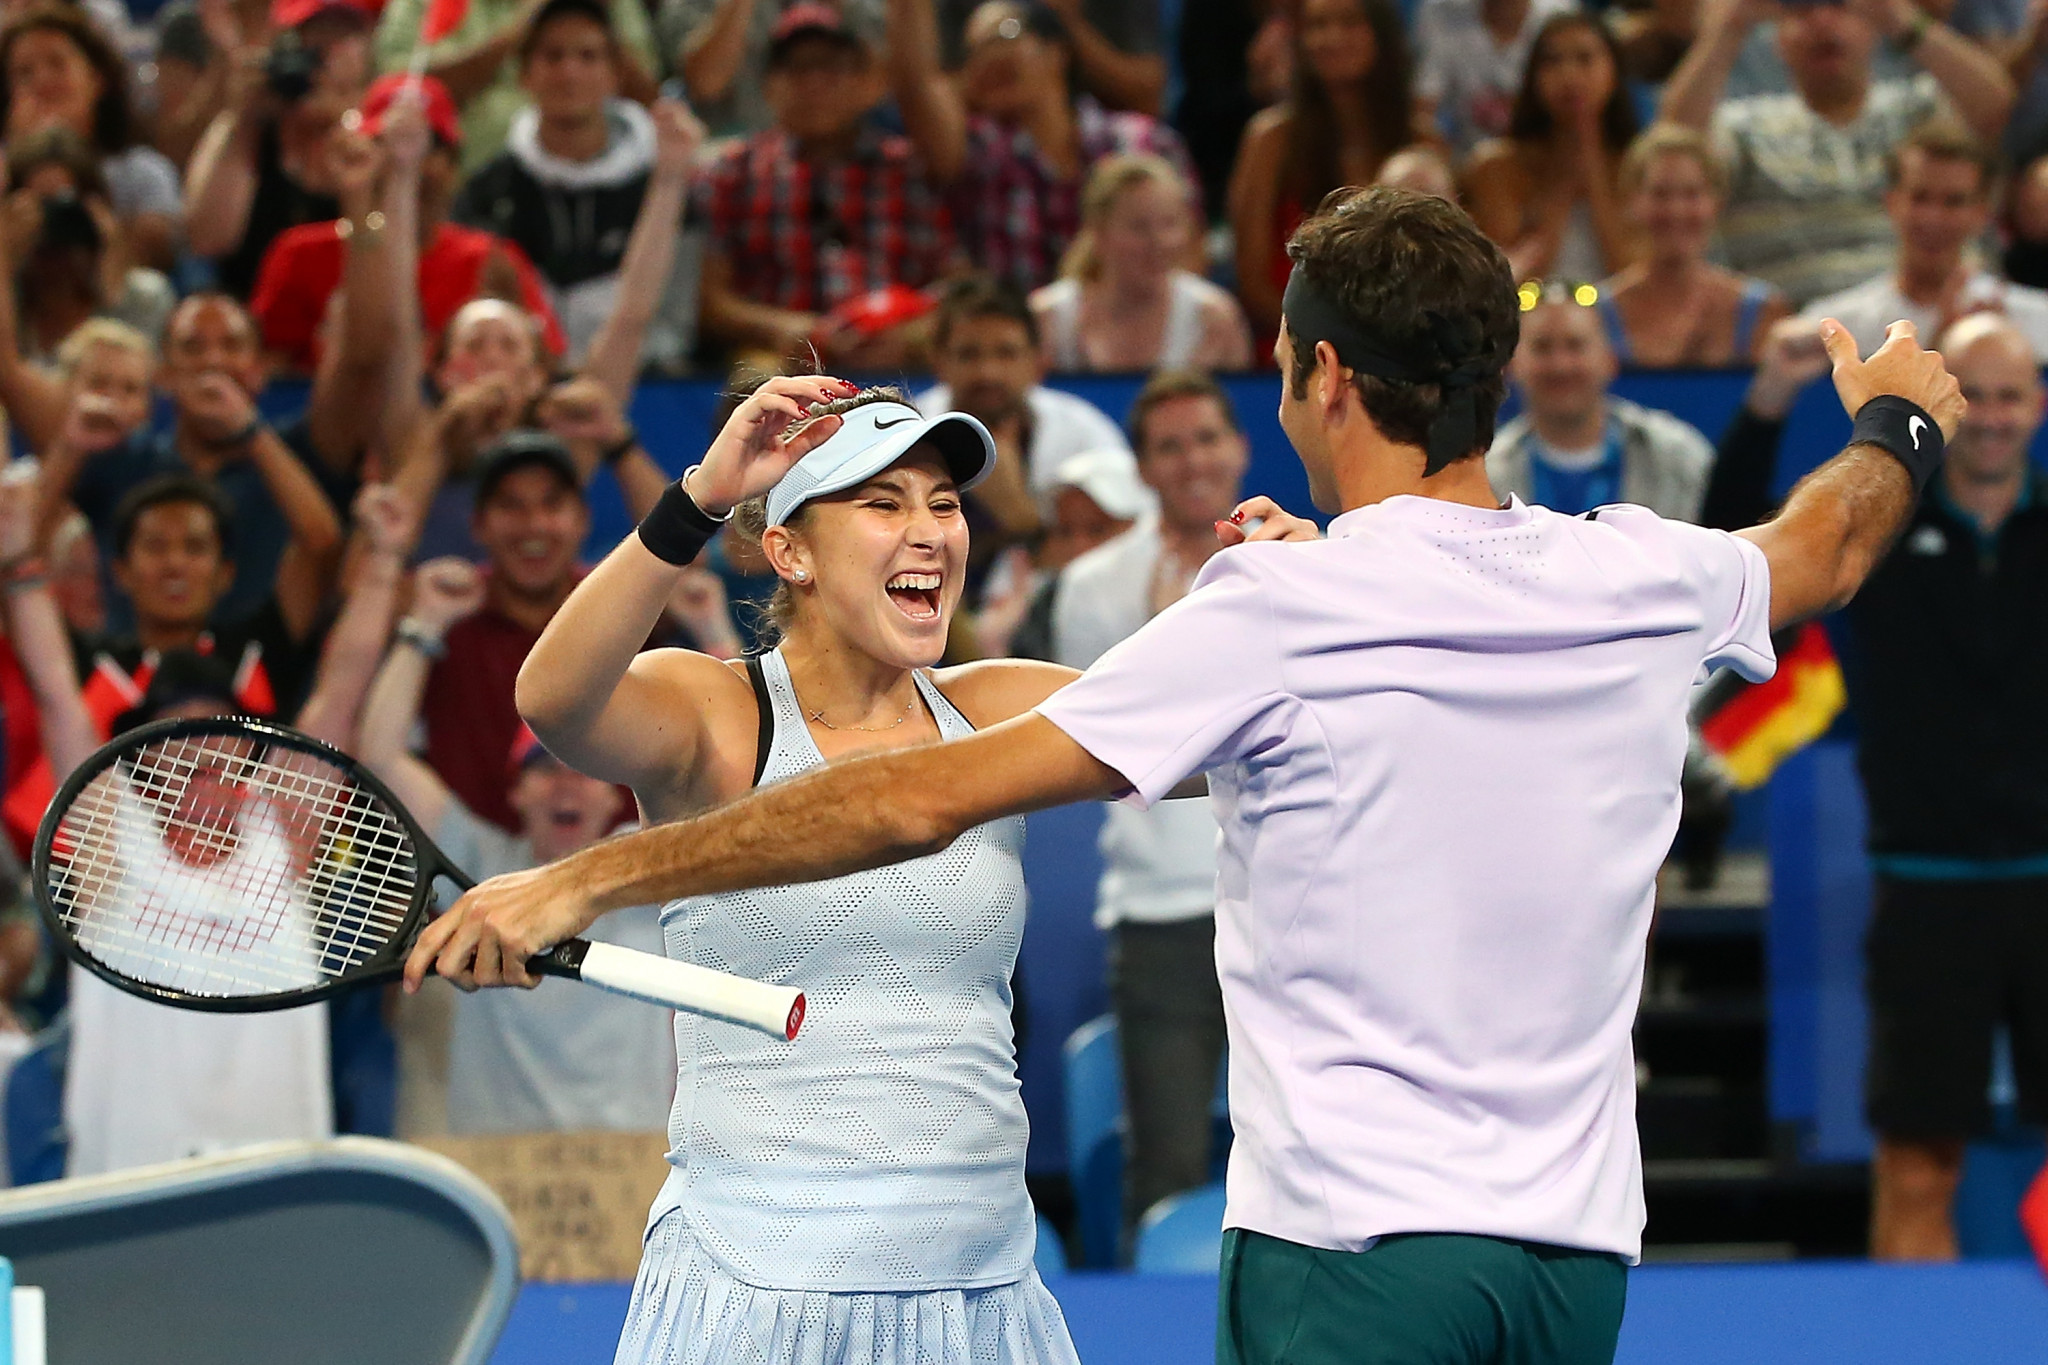 Bencic and Federer beat Zverev and Kerber 4-3, 4-2 in the Fast4 mixed doubles final to clinch the trophy ©Getty Images